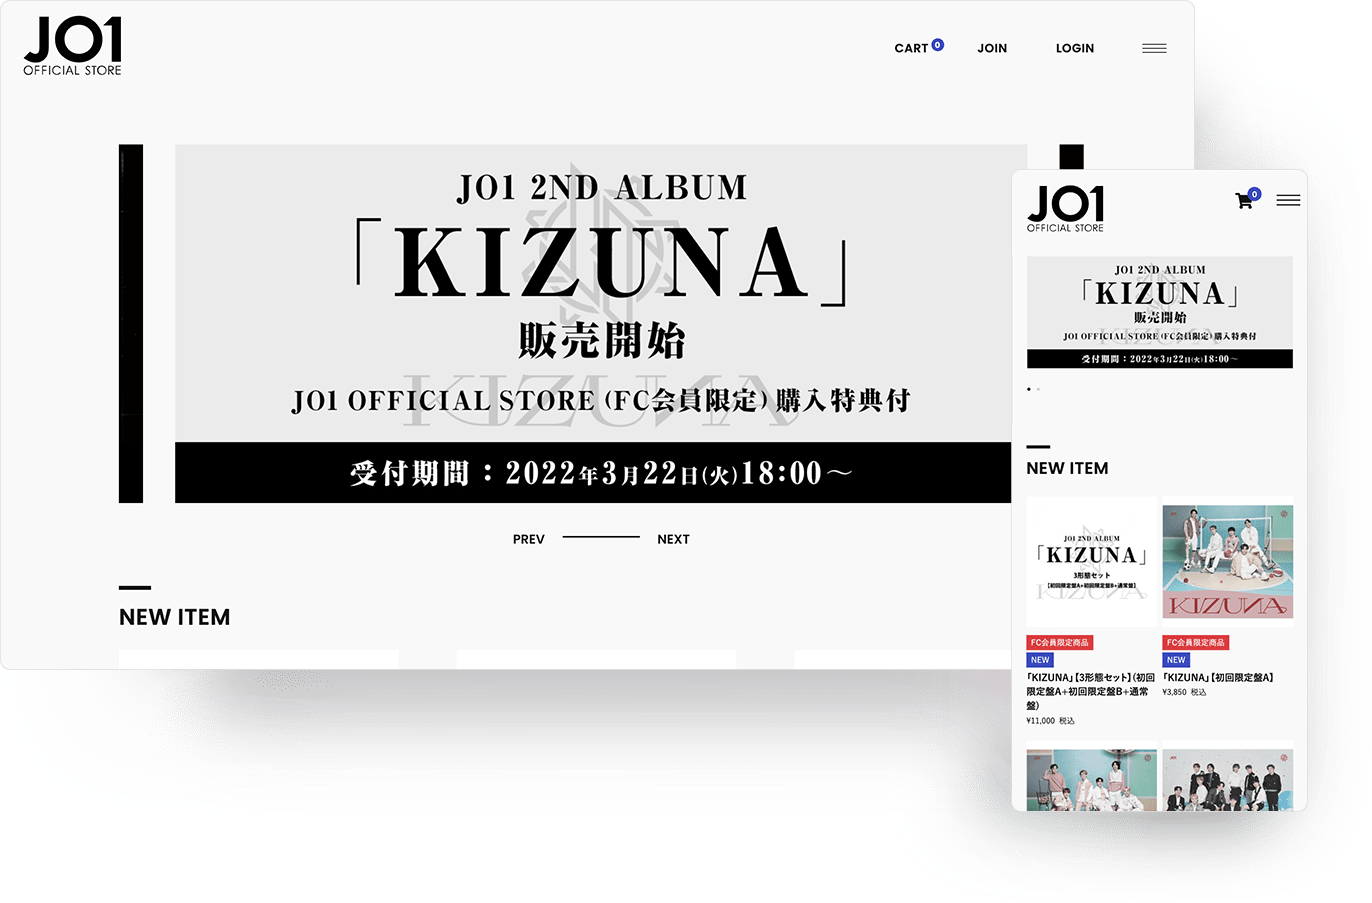 JO1 OFFICIAL STORE